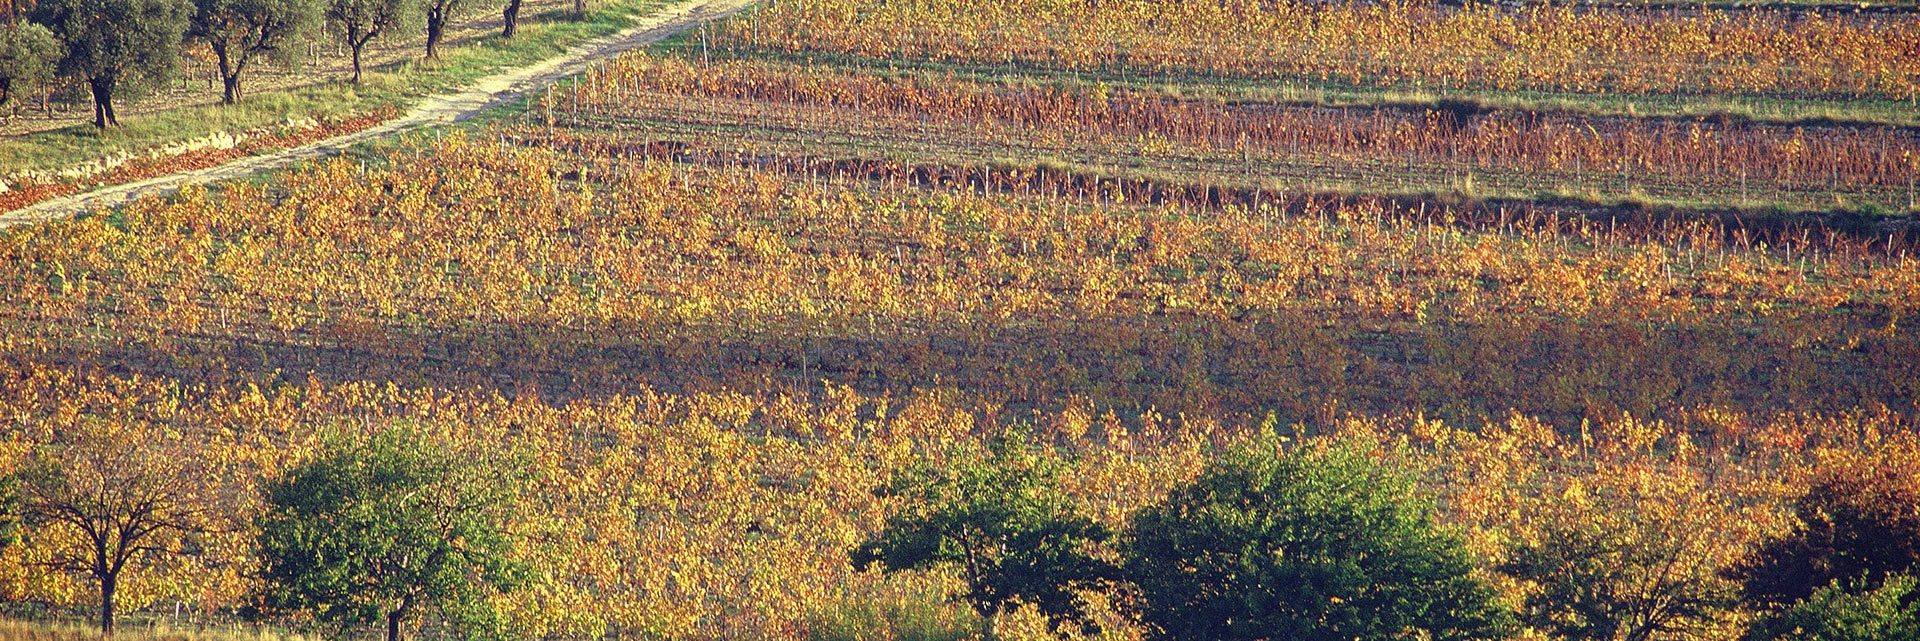 Vineyards and olive groves in autumn